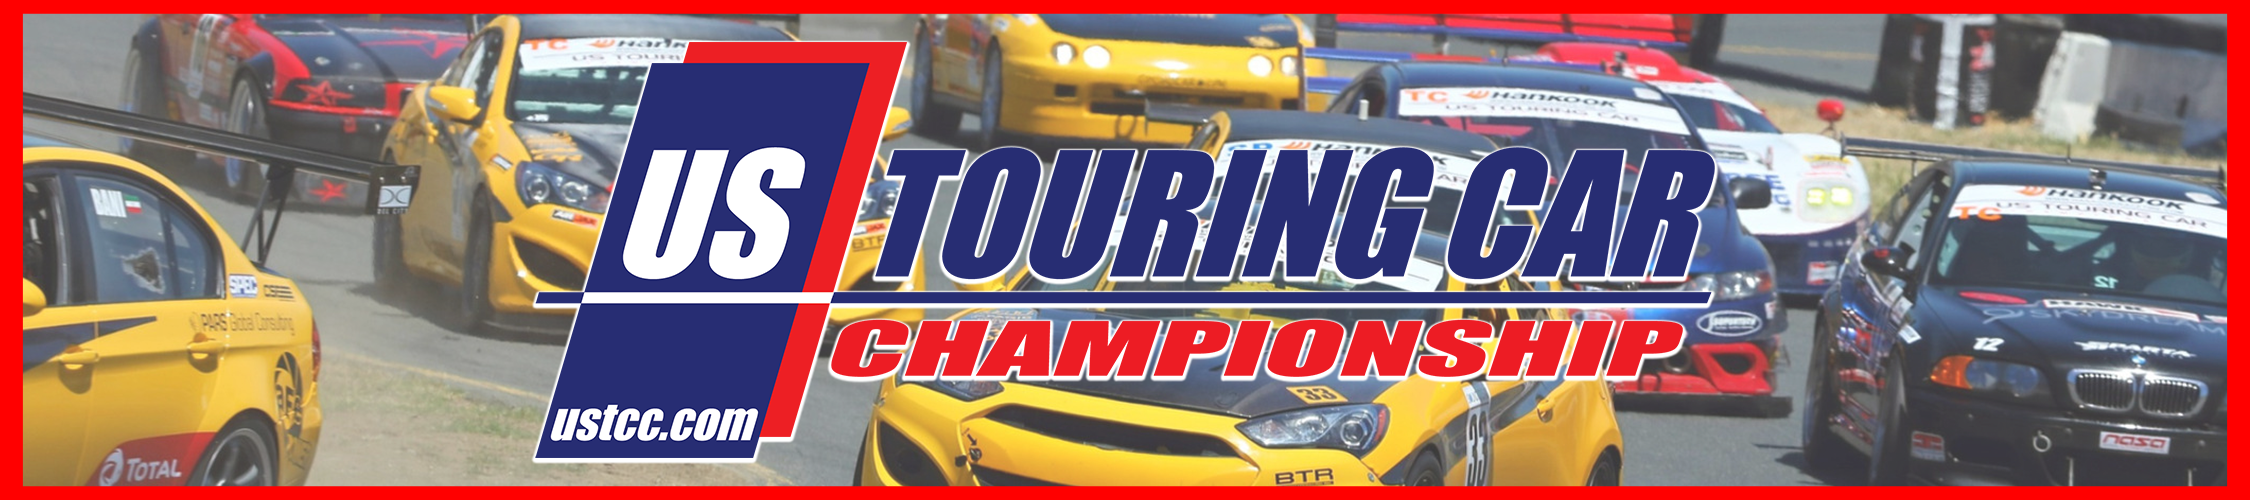 About US Touring Car Championship